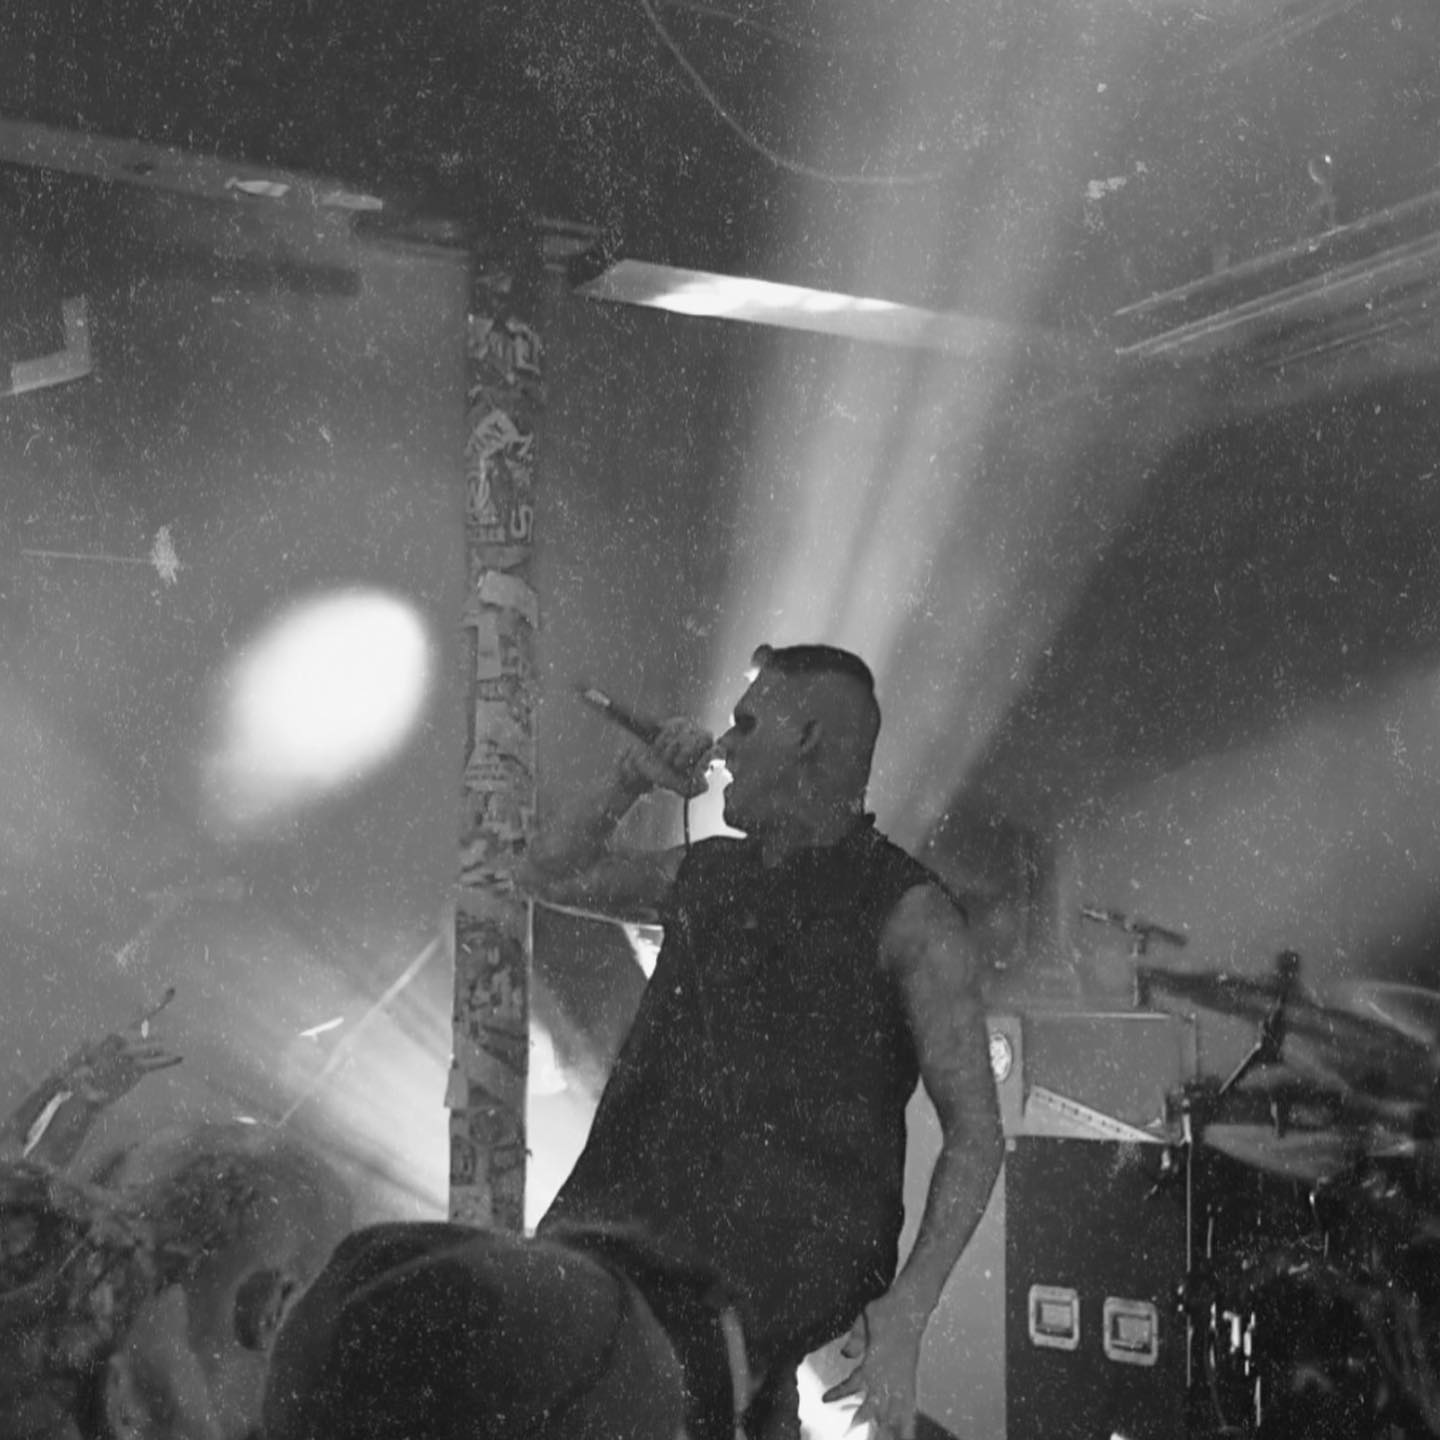 it was so good to finally see @carnifex live!! they put on a badass show (along with the other bands ofc!) hardest I’ve moshed in a long time, my body is broken. skimmed through a little video I took and got some screenshots to edit 😊🤘🏻🎸

#elcorazon #seattle #metal #carnifex